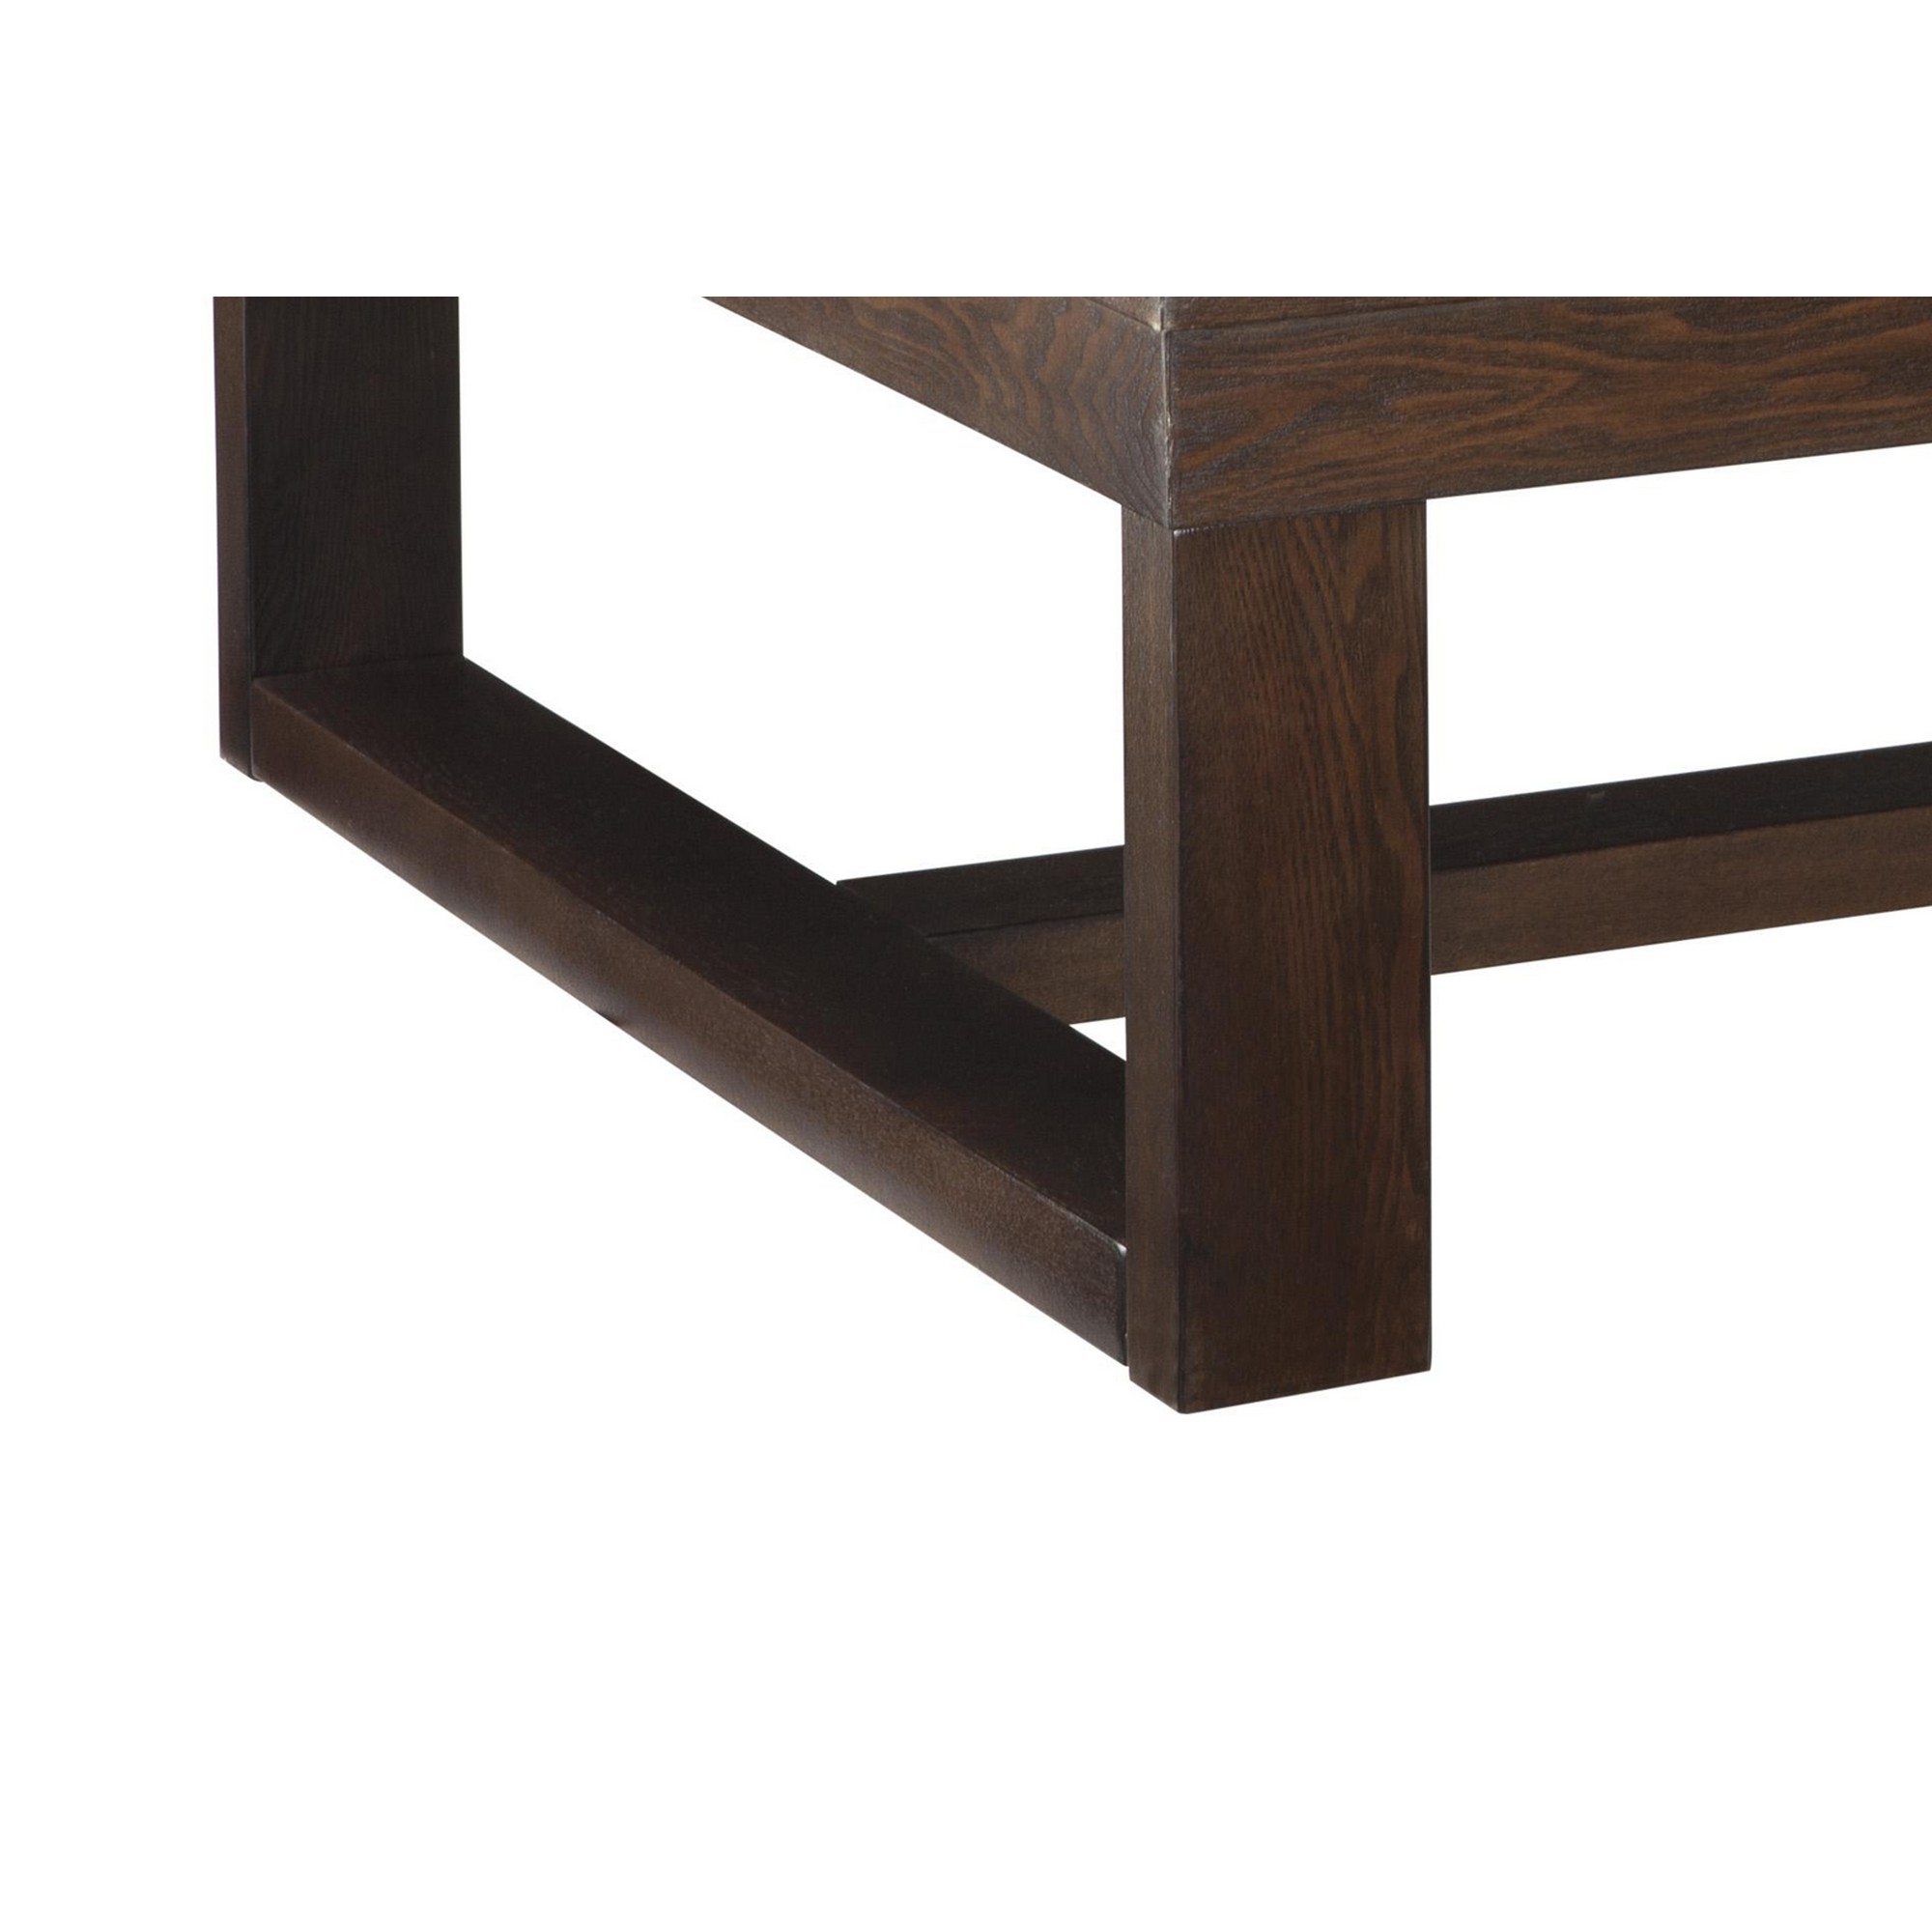 Grained Wooden Frame Cocktail Table With Trestle Base, Dark Brown- Saltoro Sherpi